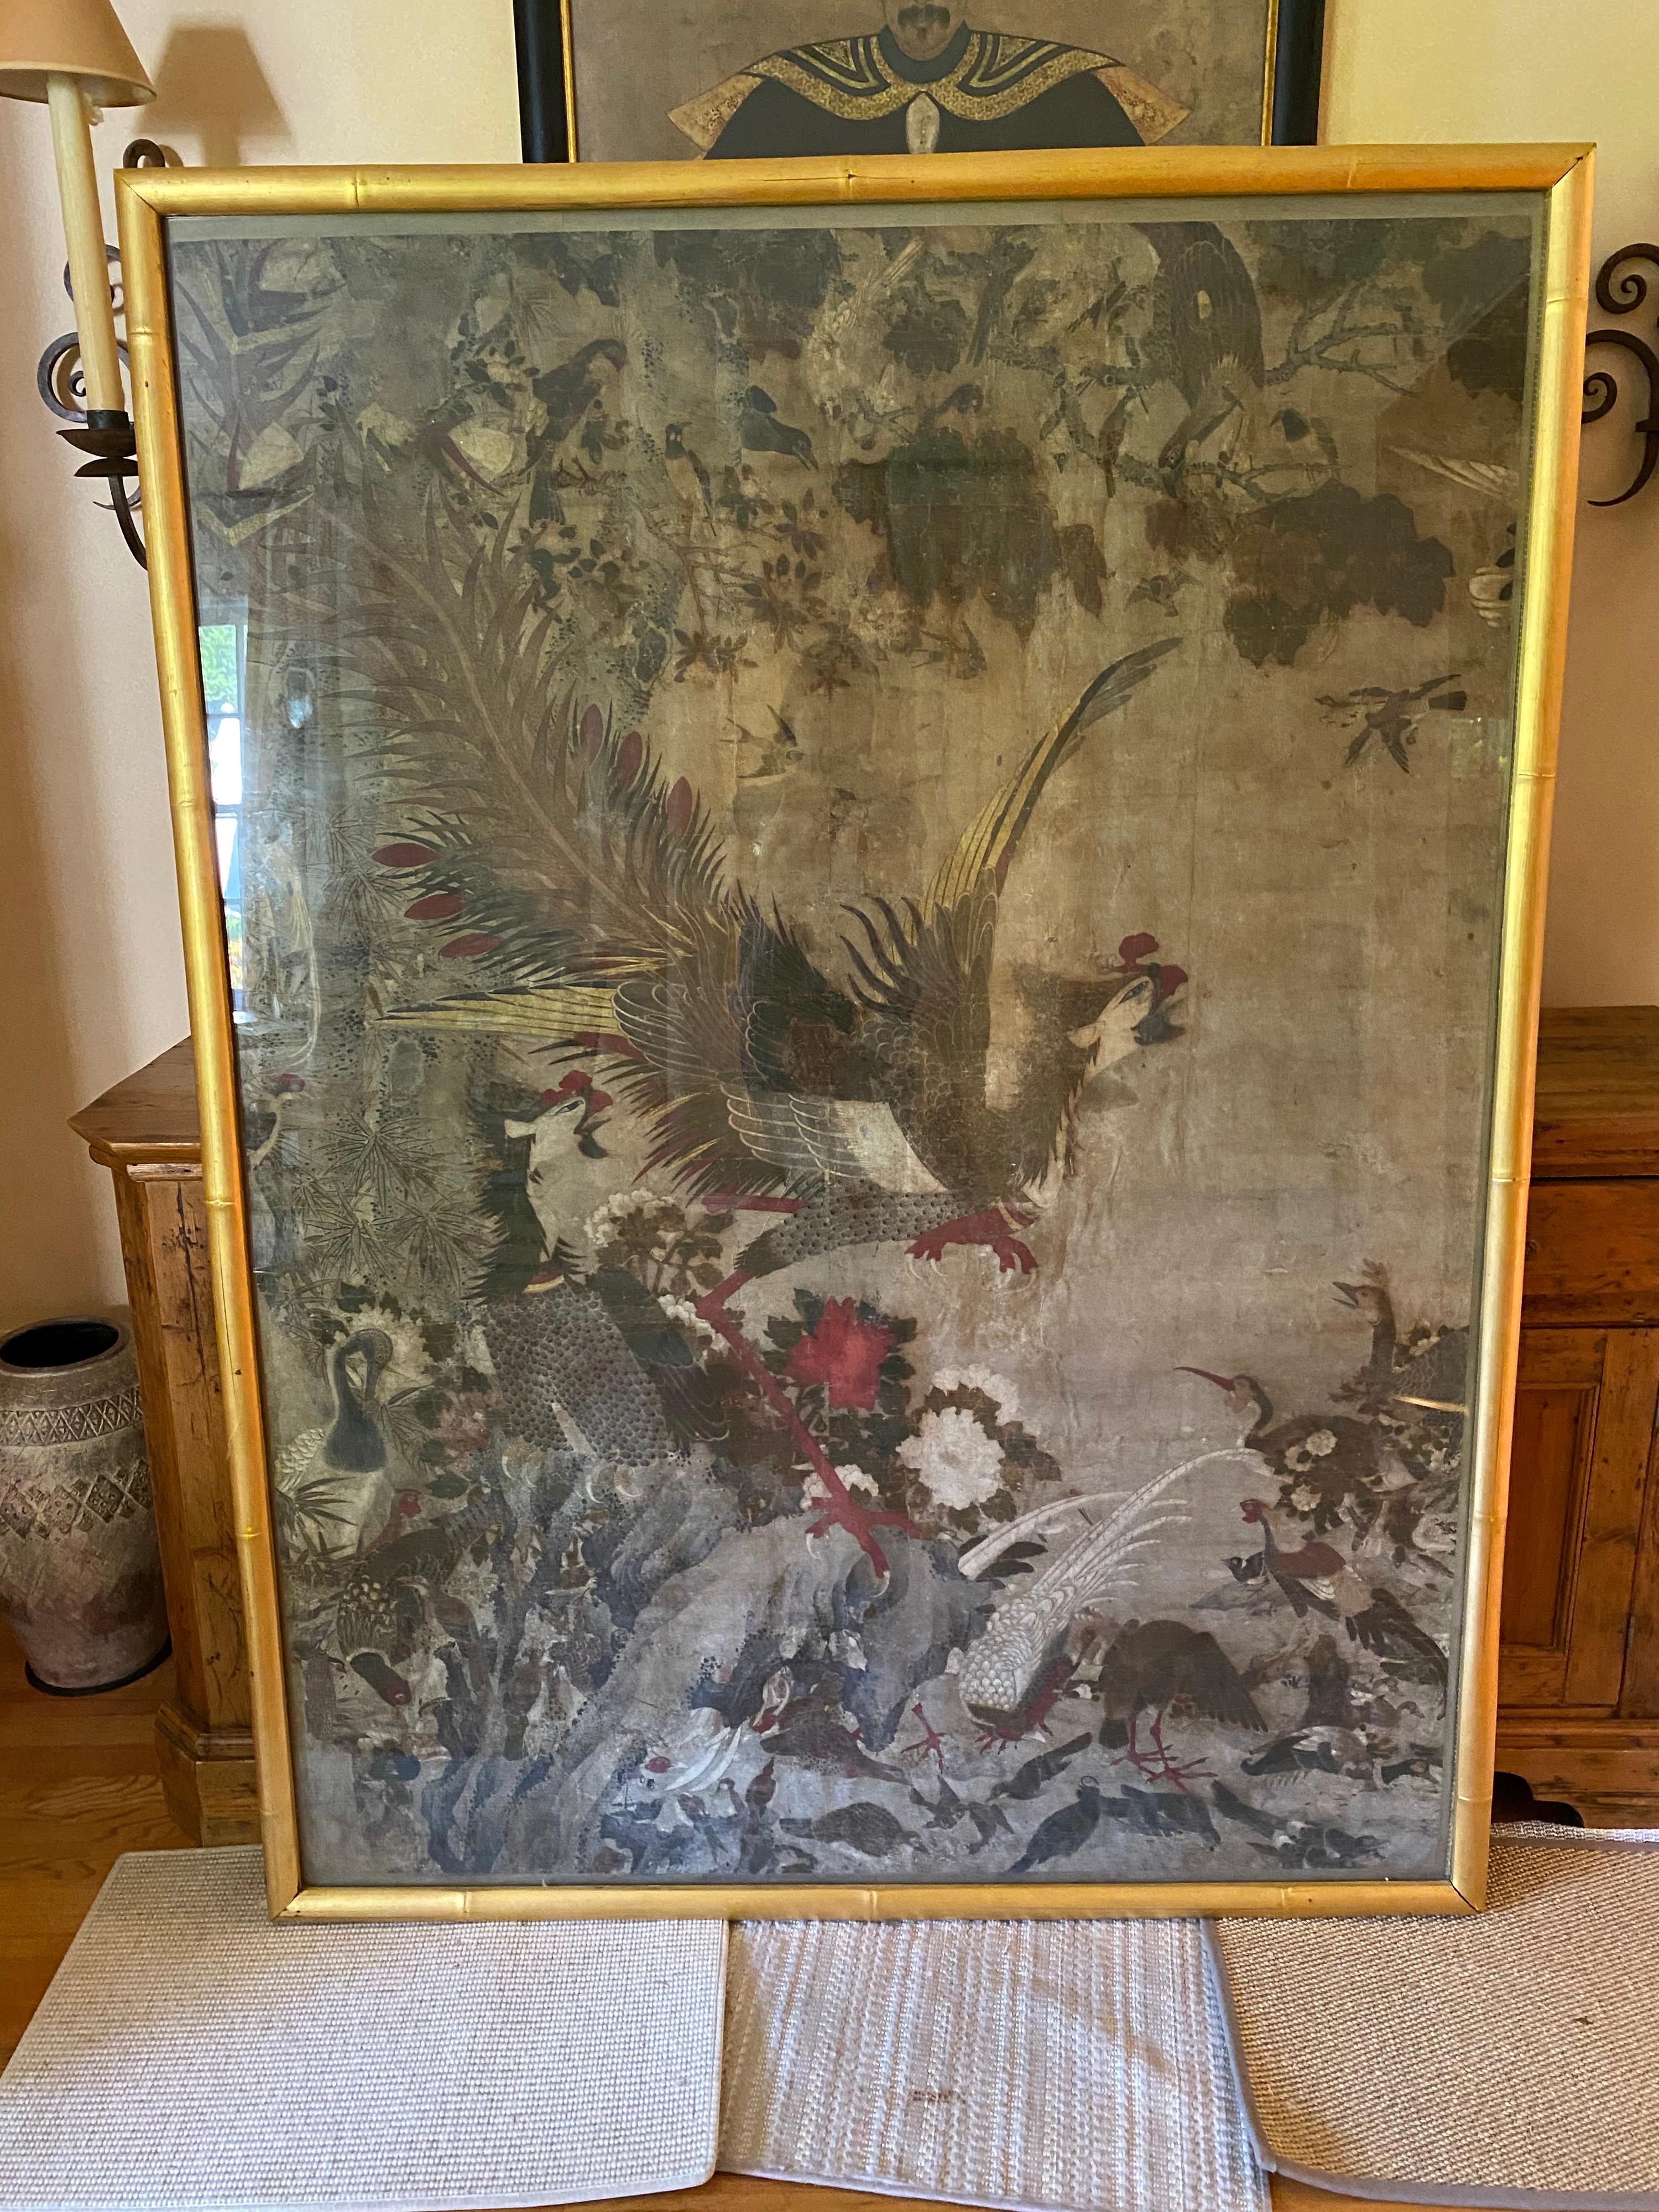 Chinese hand-painted wallpaper of Phoenix, 18th century wallpaper stretched on wood. Some crazing and fine cracks evident upon closer look. Behind glass. The painting shows incredibly fine details, especially on the feathers.

During the 17th